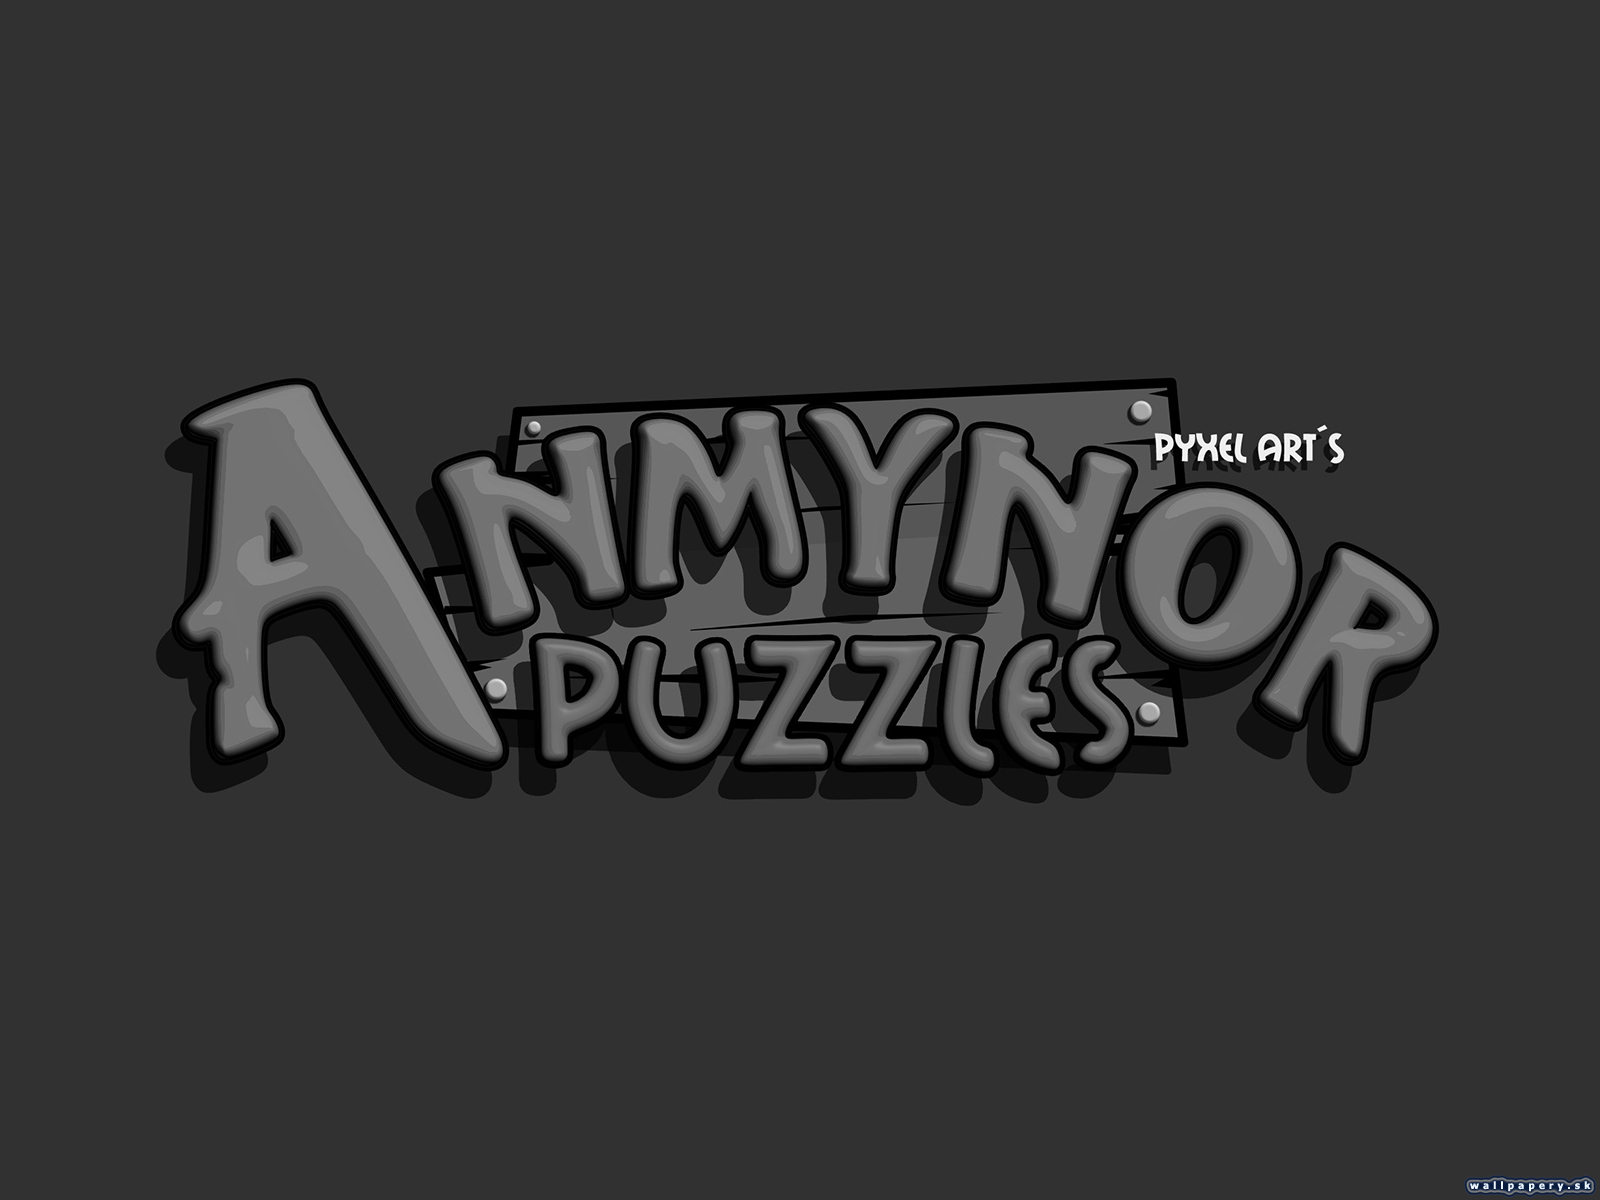 Anmynor Puzzles - wallpaper 3